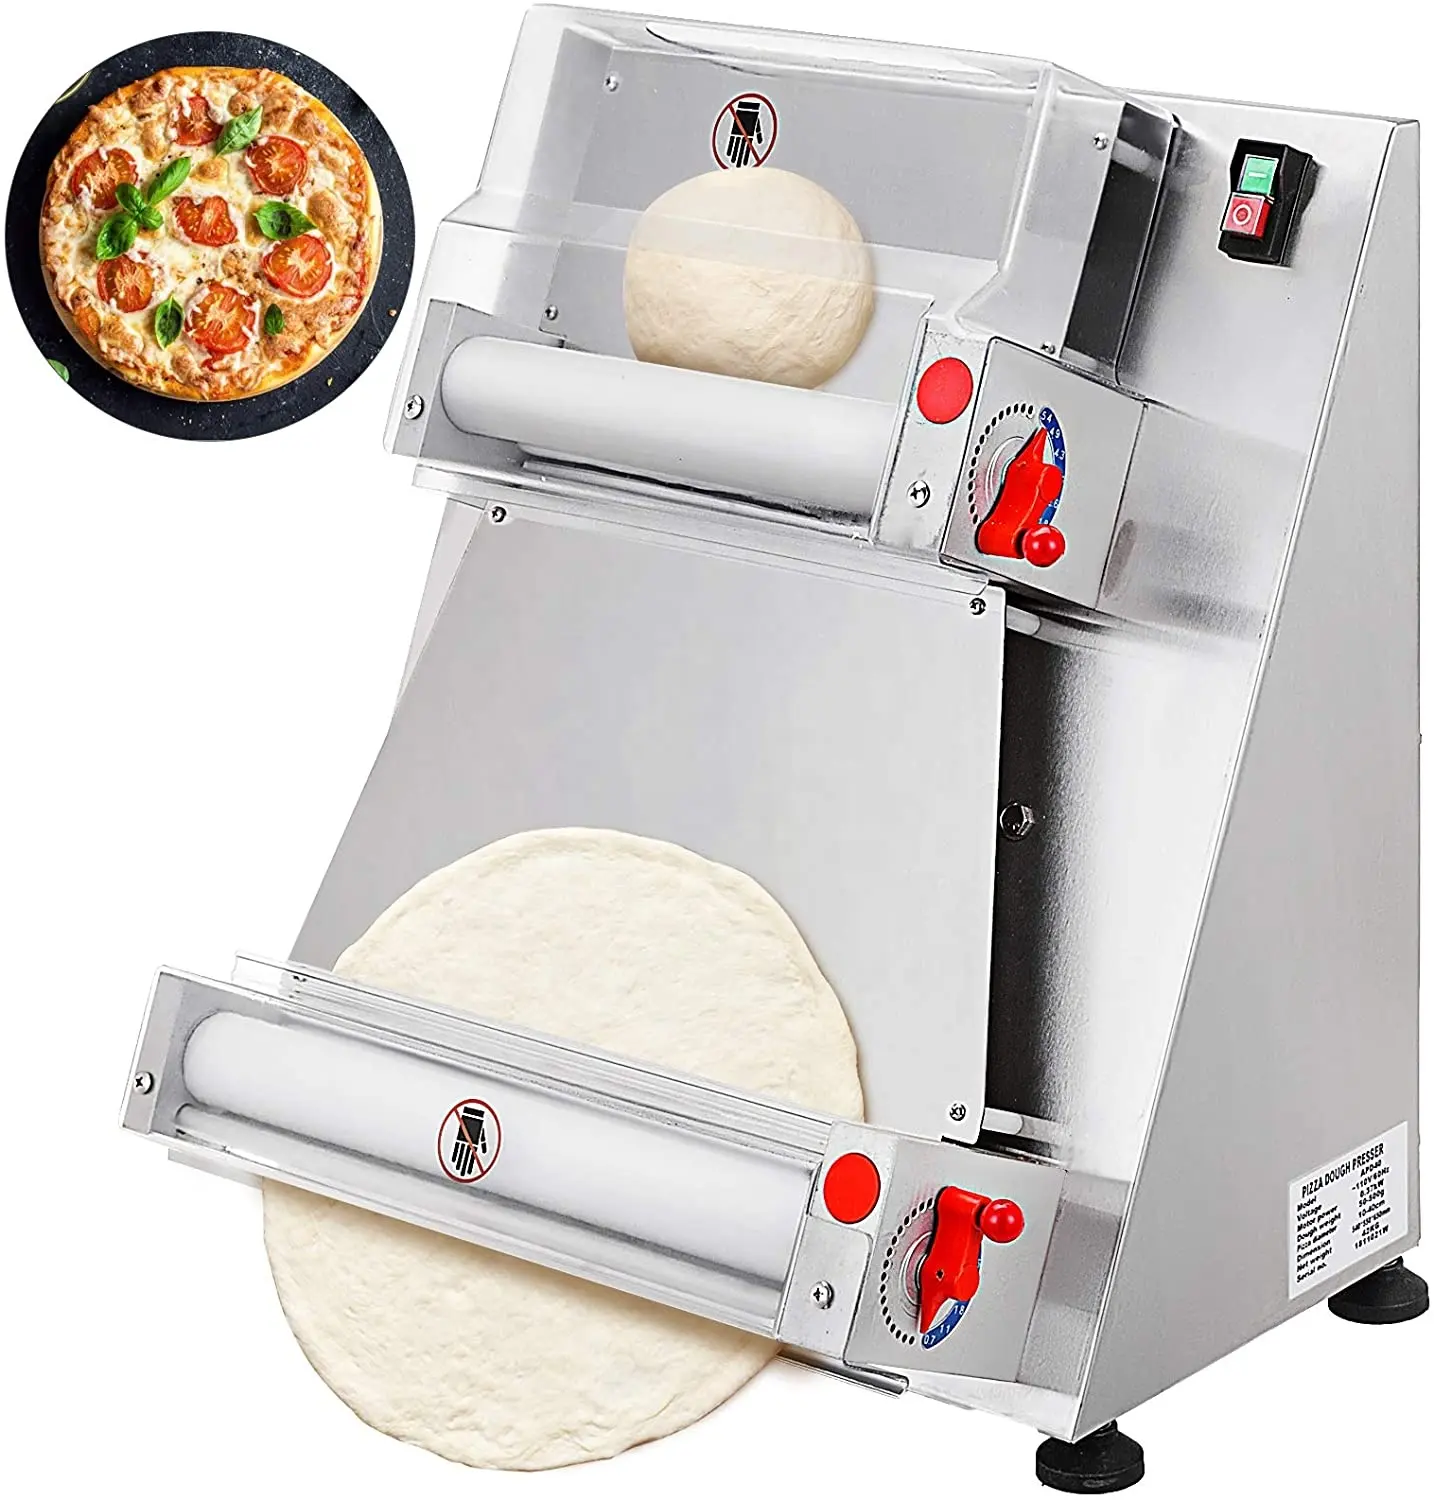 Supertise Bakery kitchen floor standing dough sheeter machine price made in china pizza dough roller machine